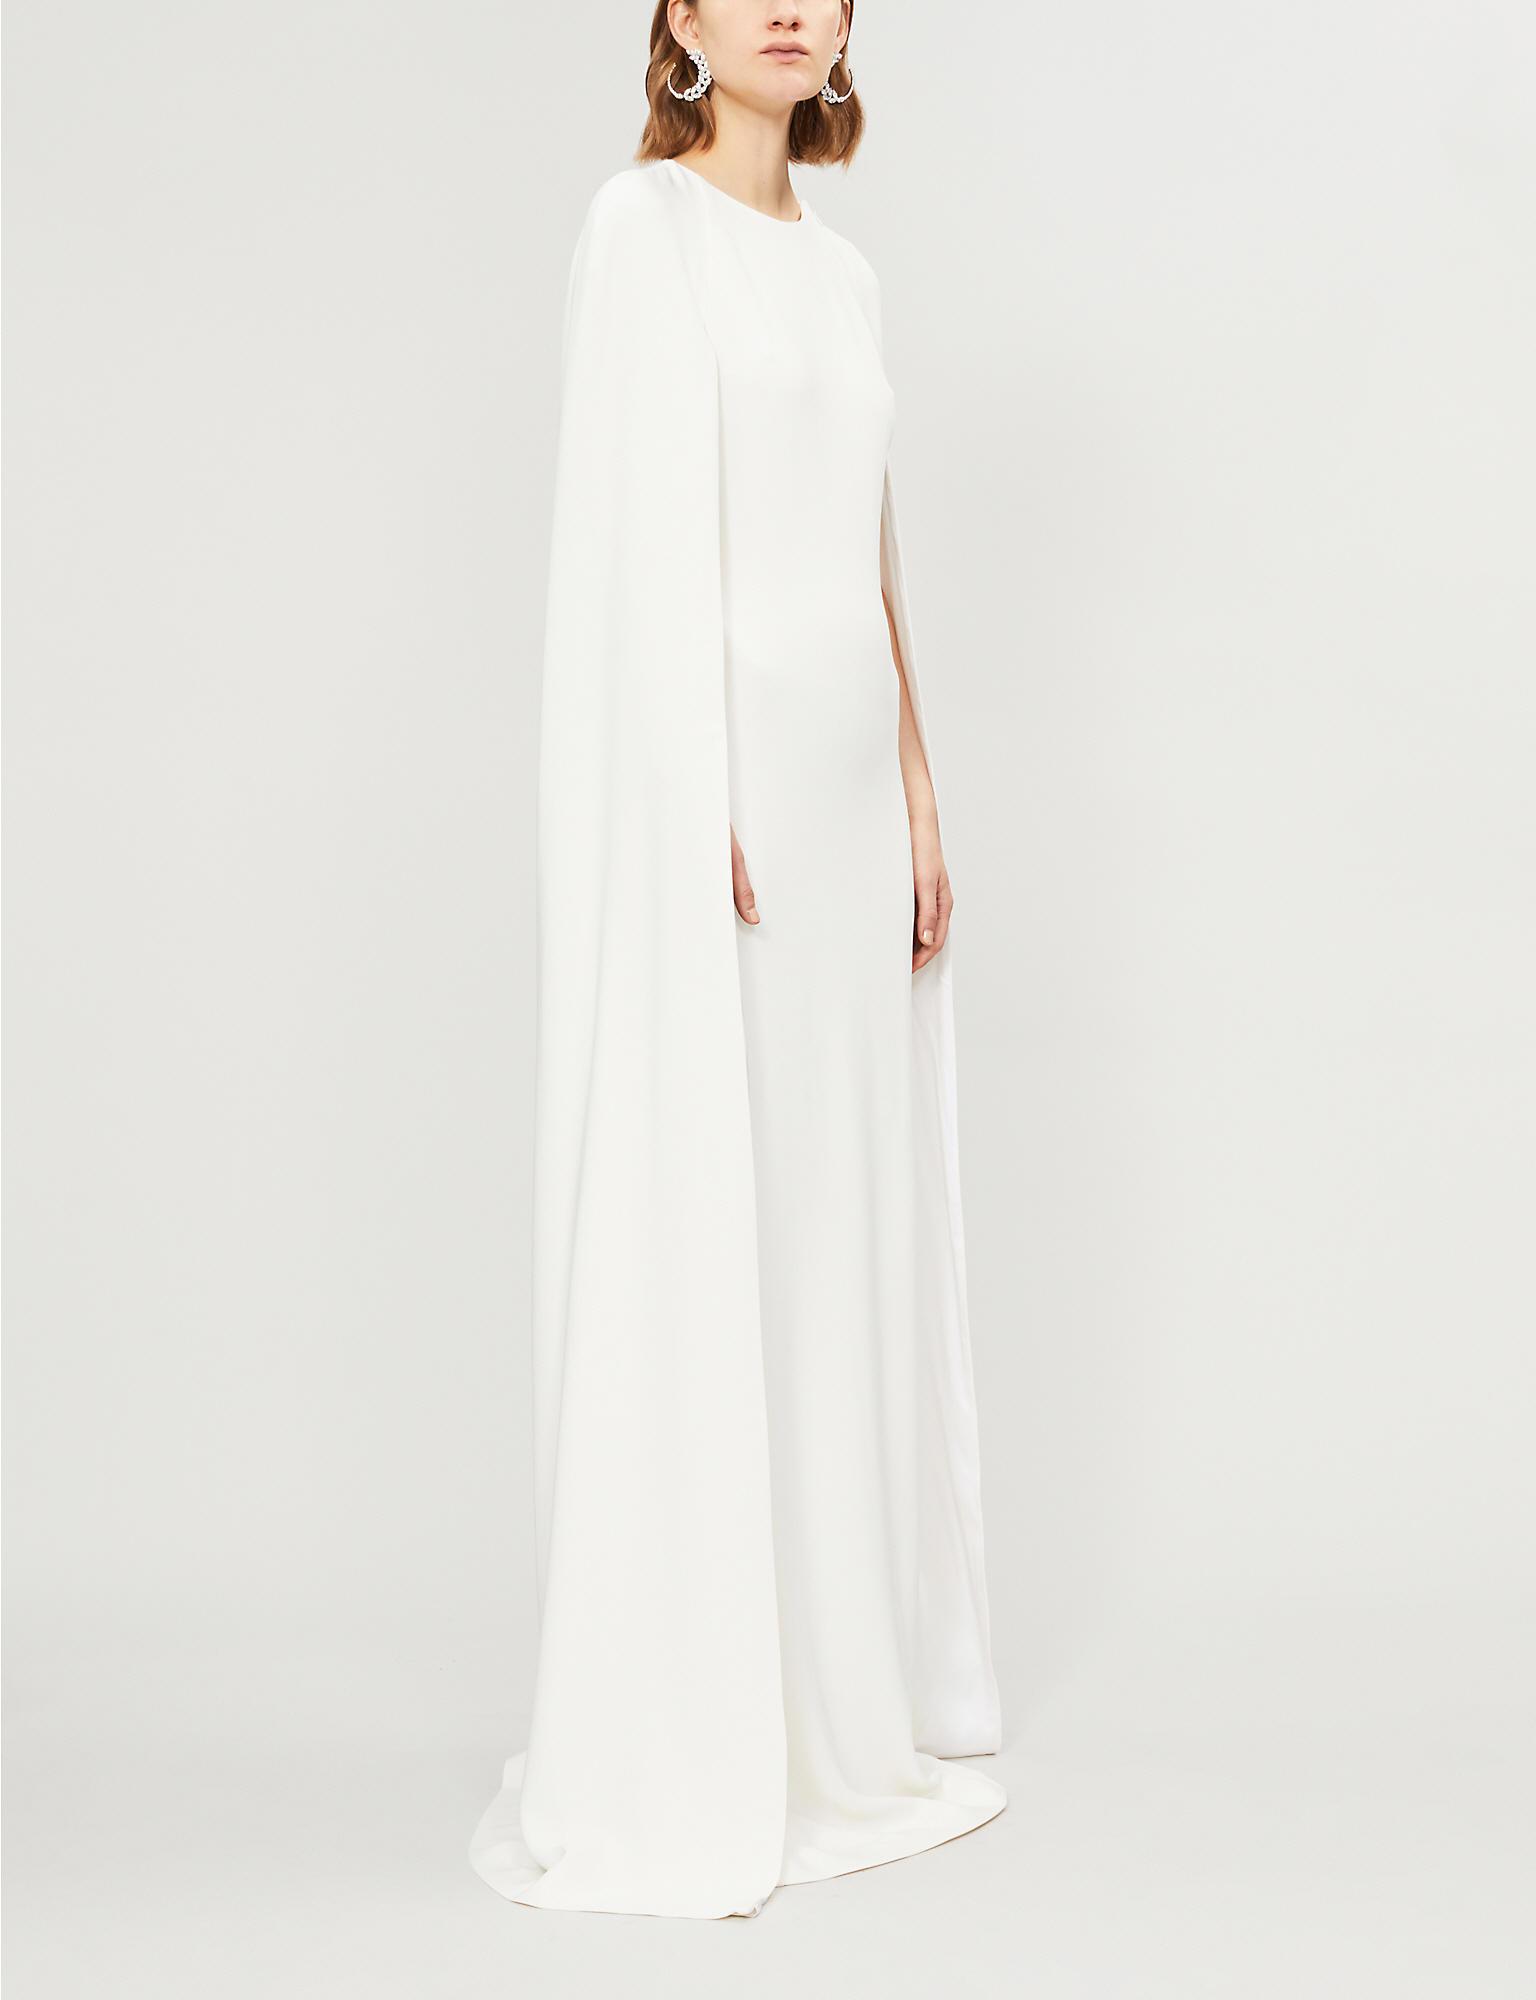 Stella McCartney Violet Crepe Cape Gown in White | Lyst